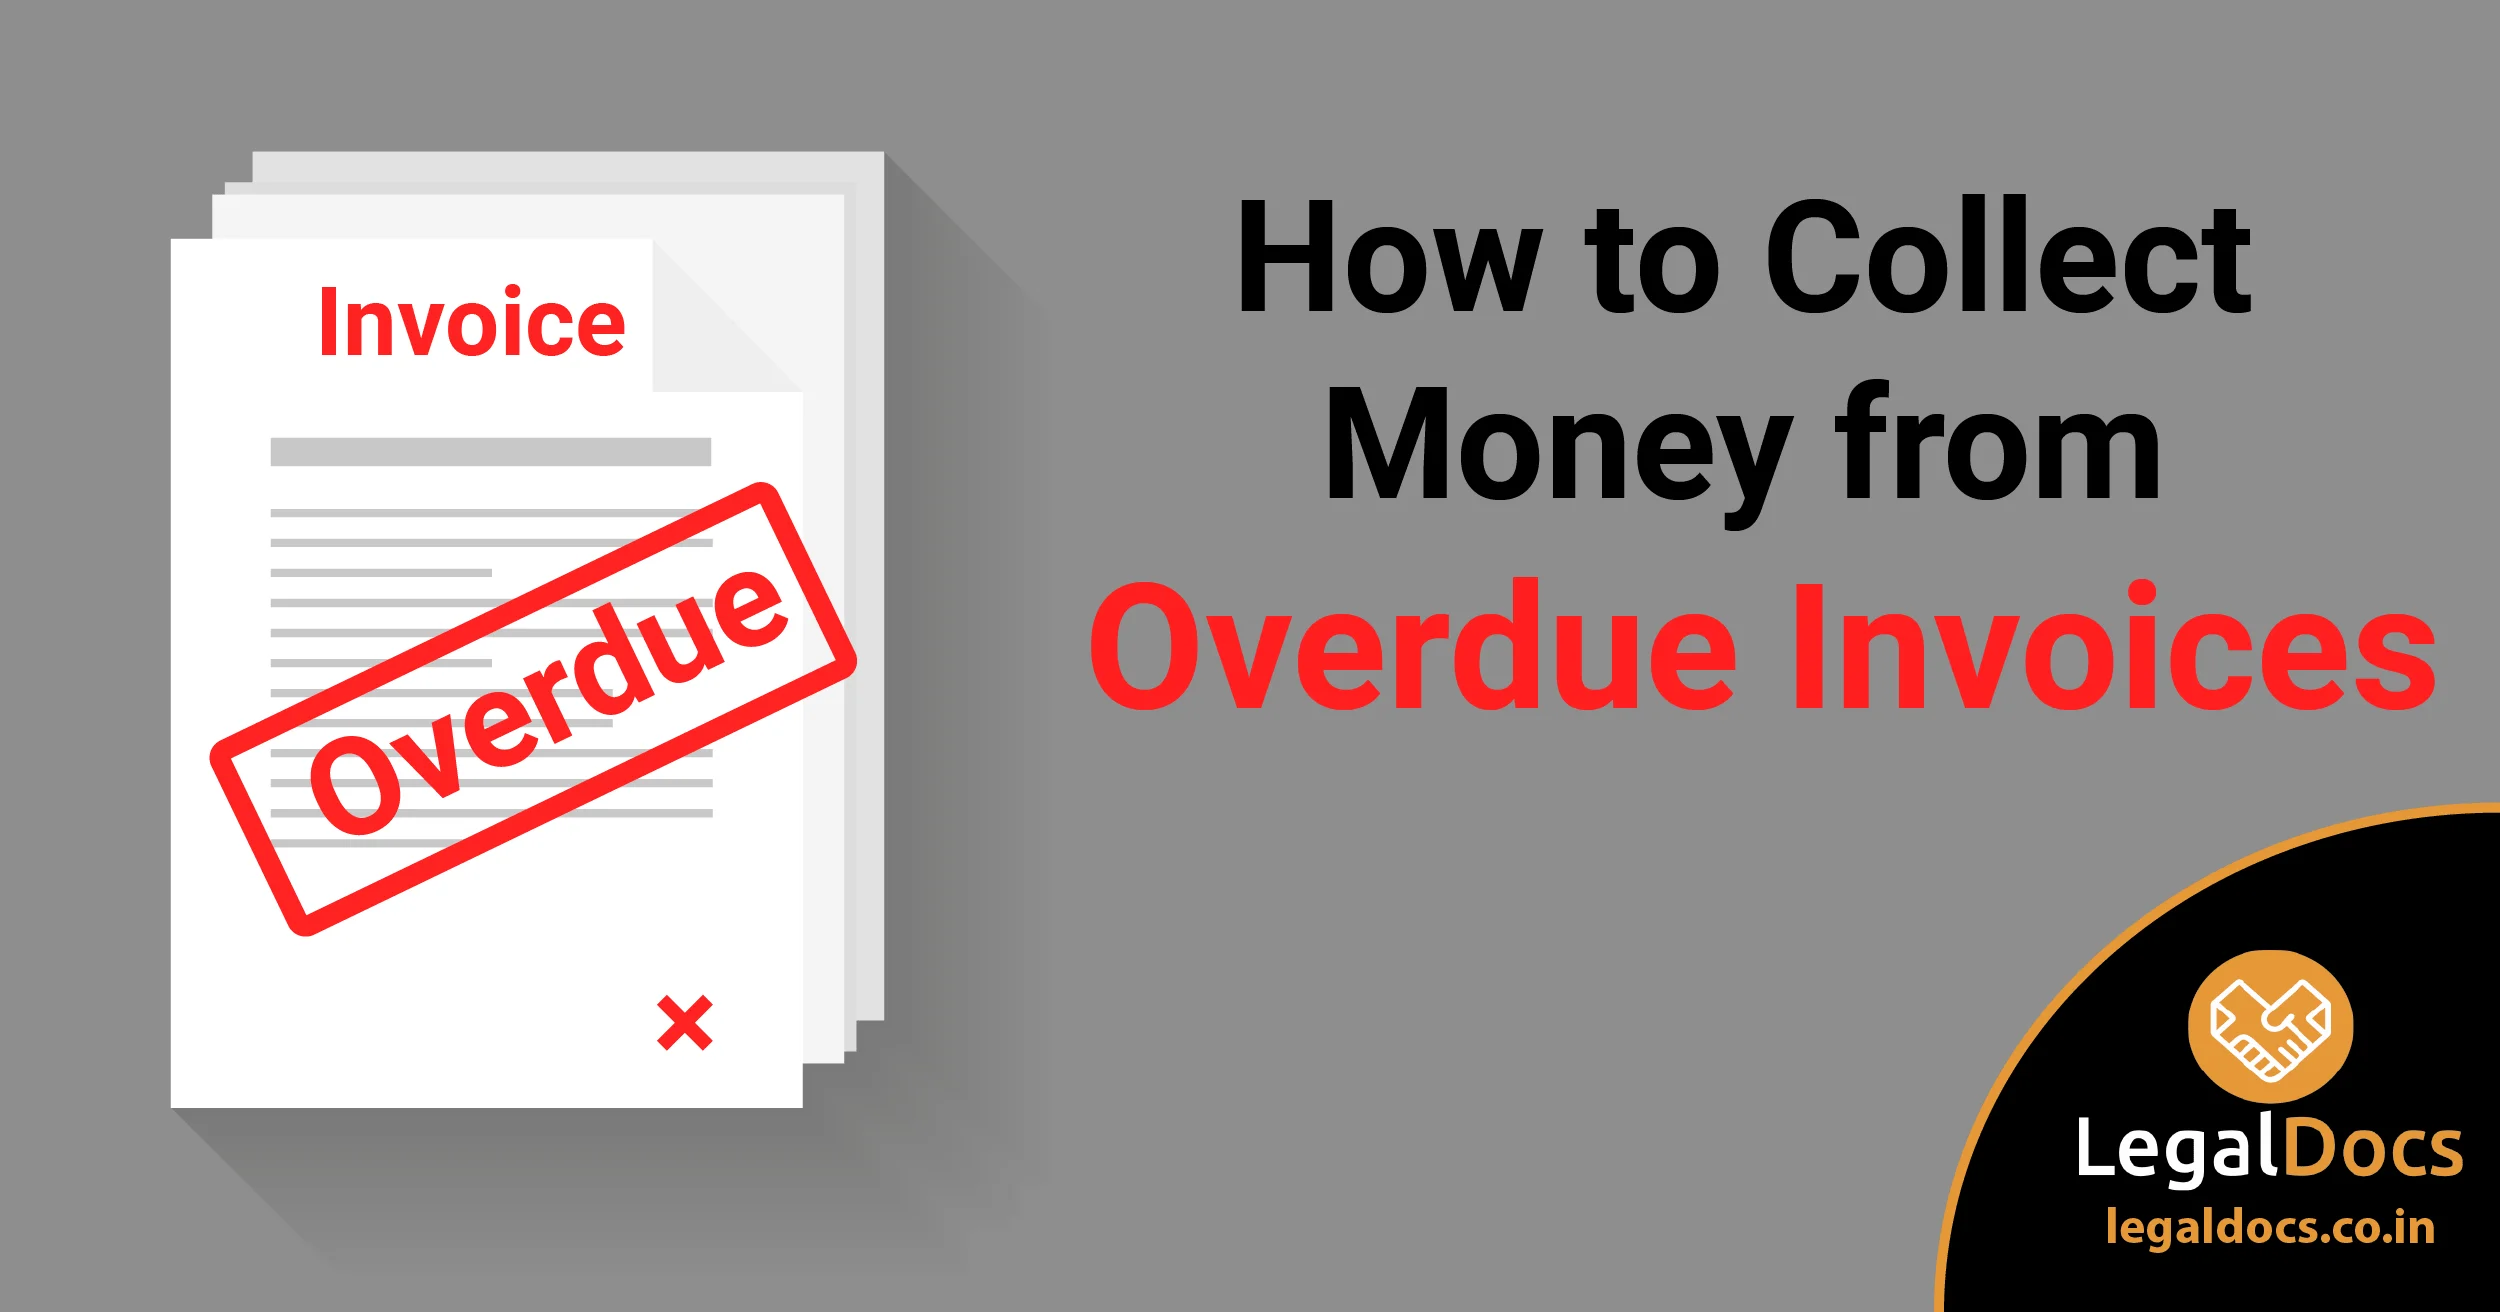 How to Collect Money from Overdue Invoices? - LegalDocs